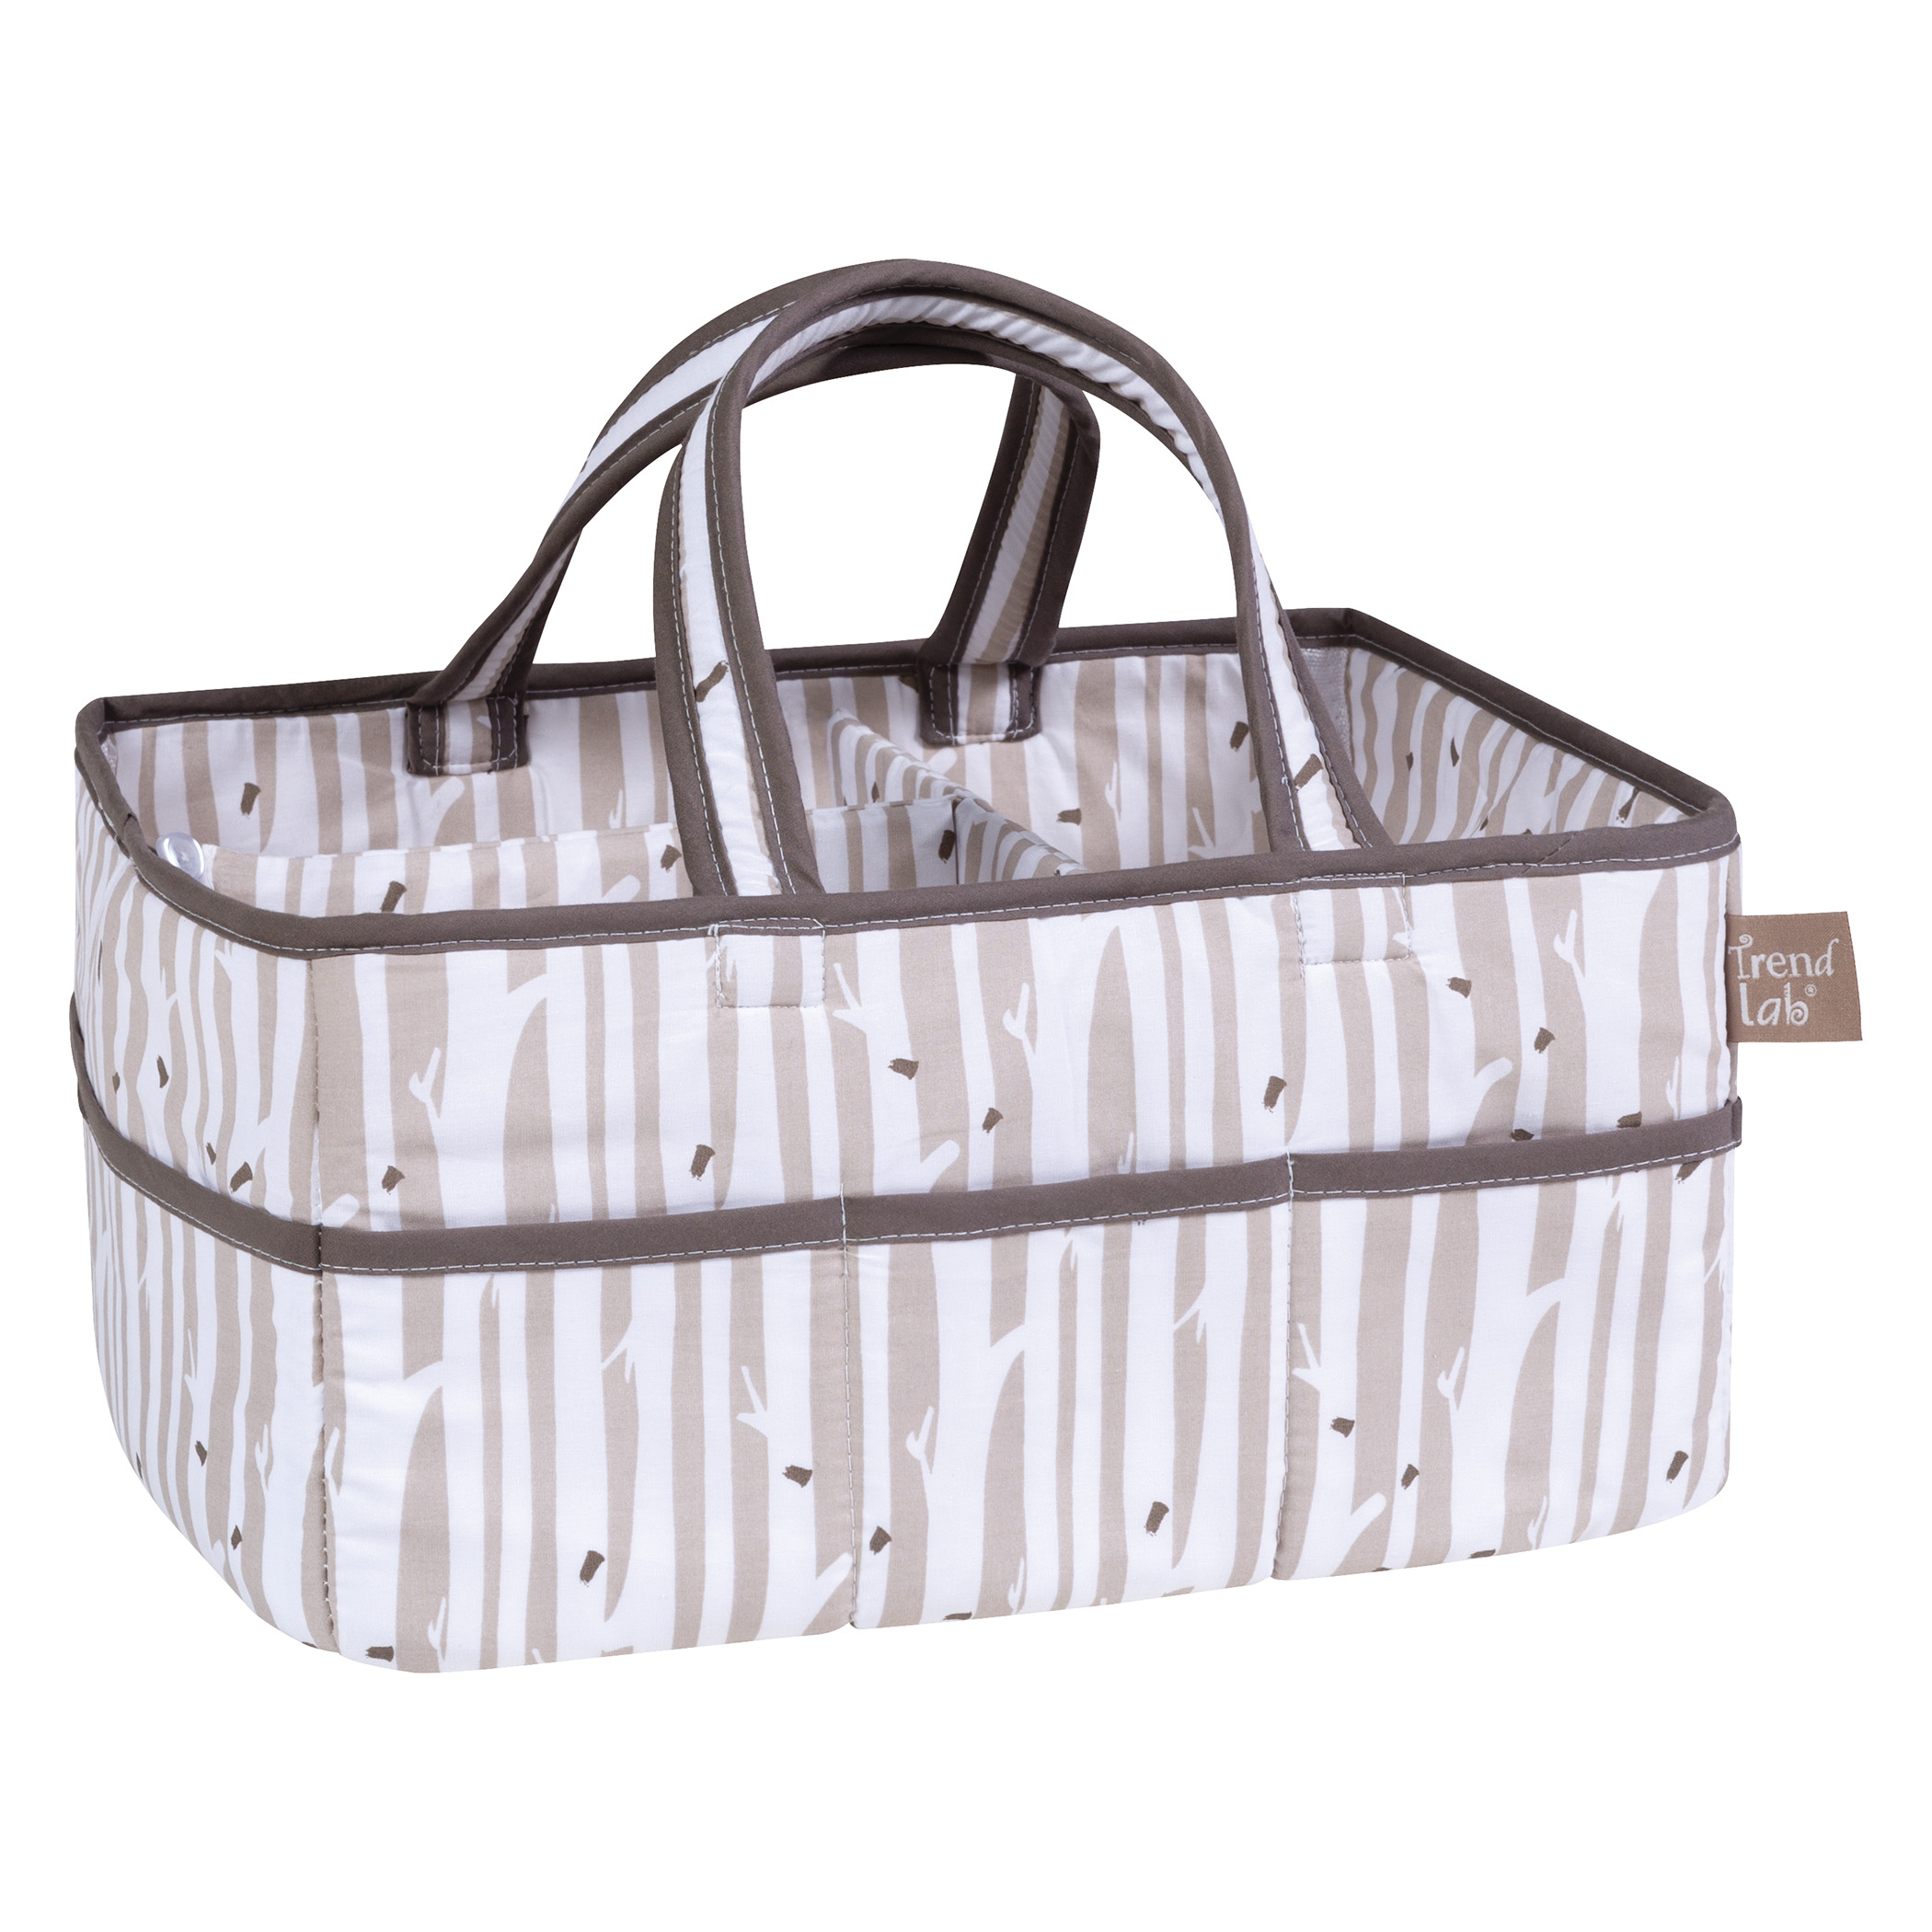 Trend Lab Portable Diaper Caddy, Birch - image 2 of 2